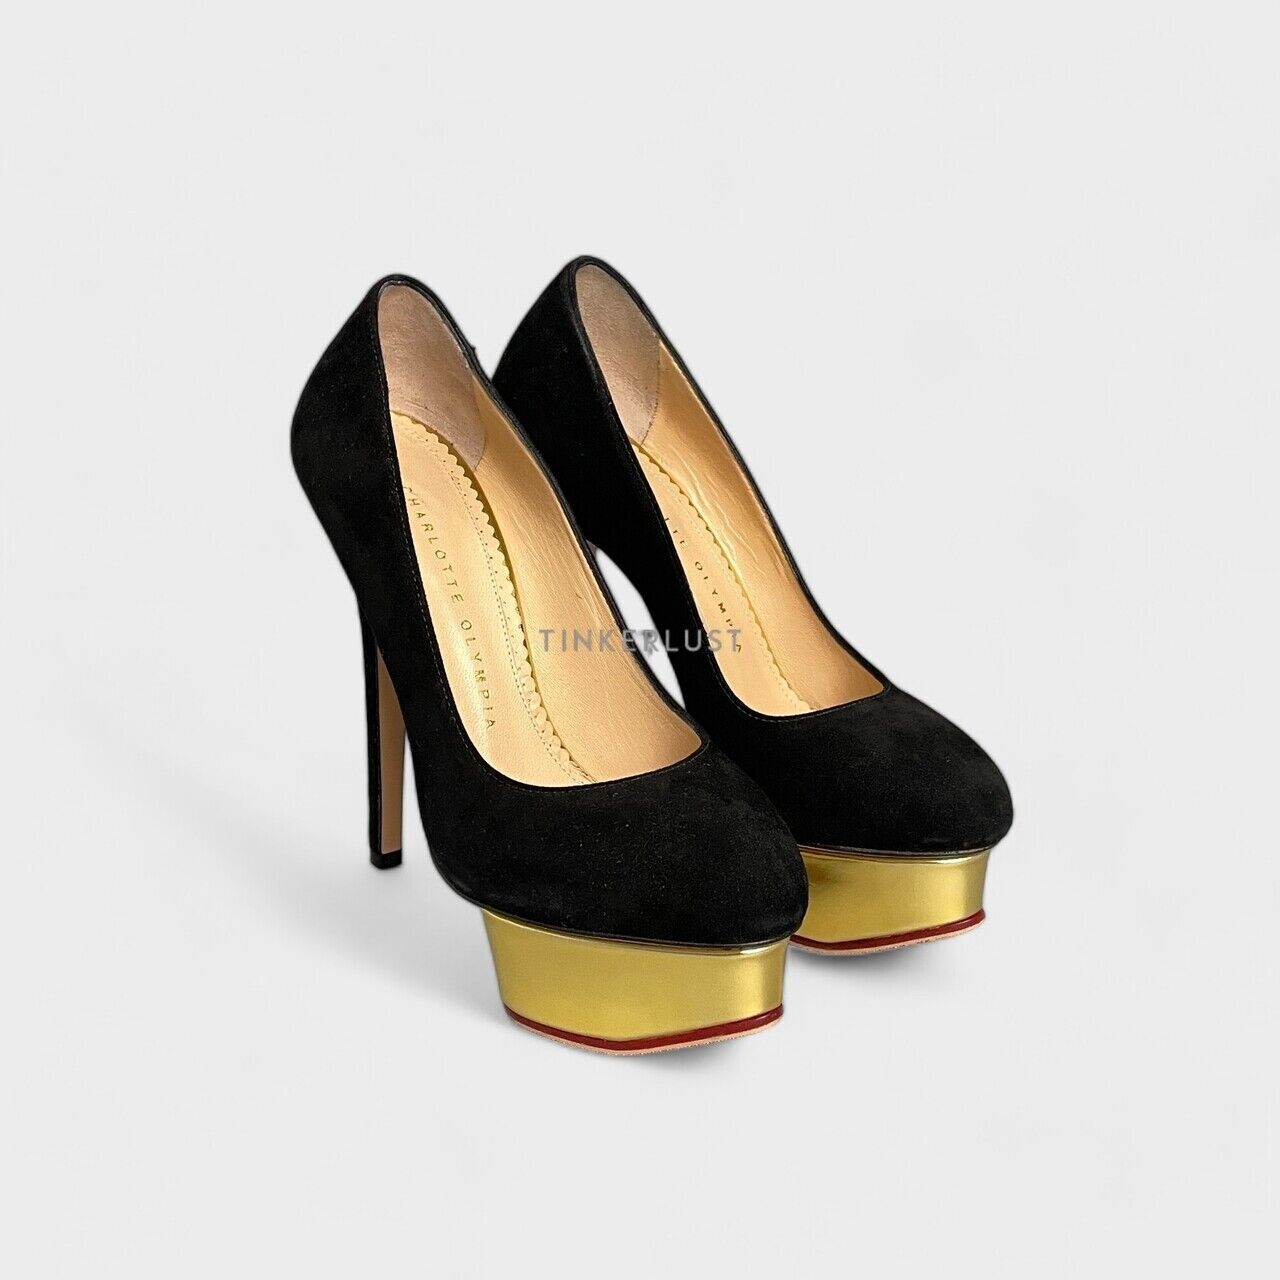 Charlotte Olympia Dolly Pumps Black Suede Heels